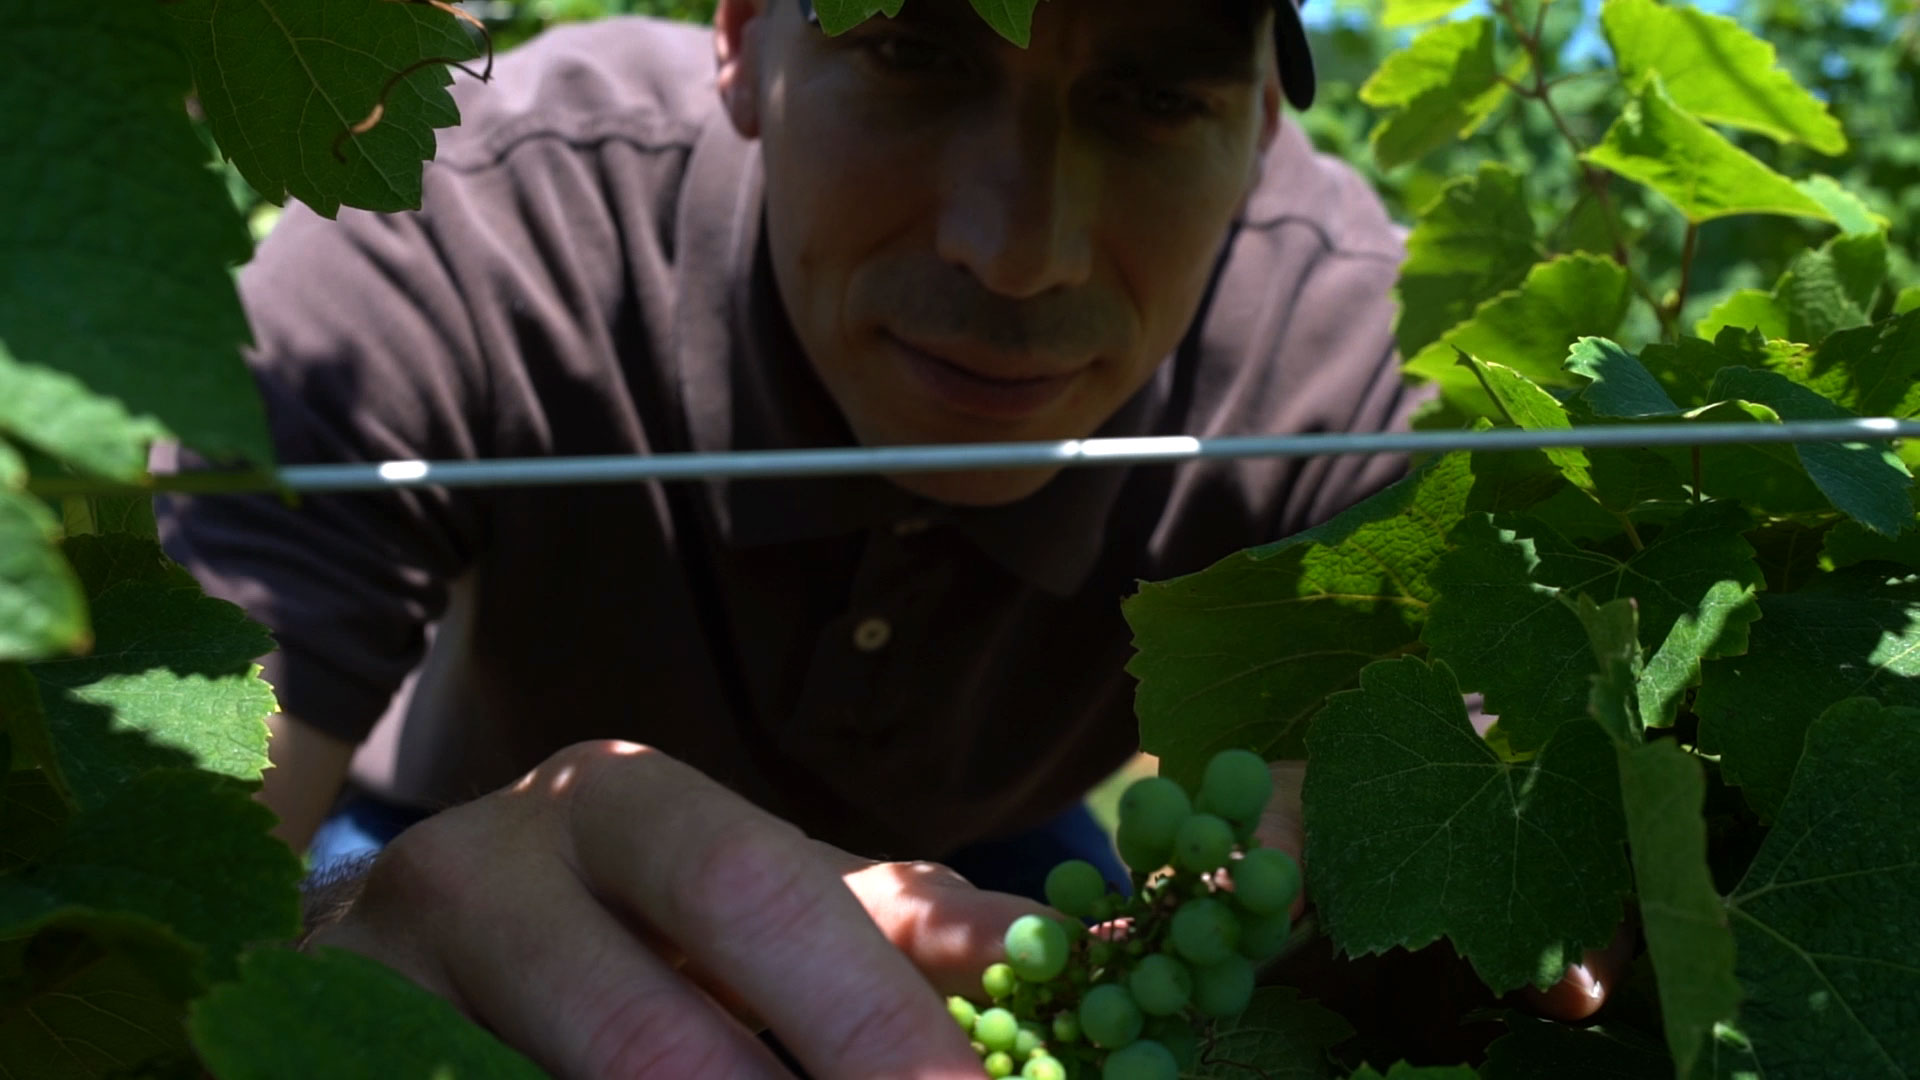 Mount Nittany Winery's Scott Hilliker examines grapes on a vine